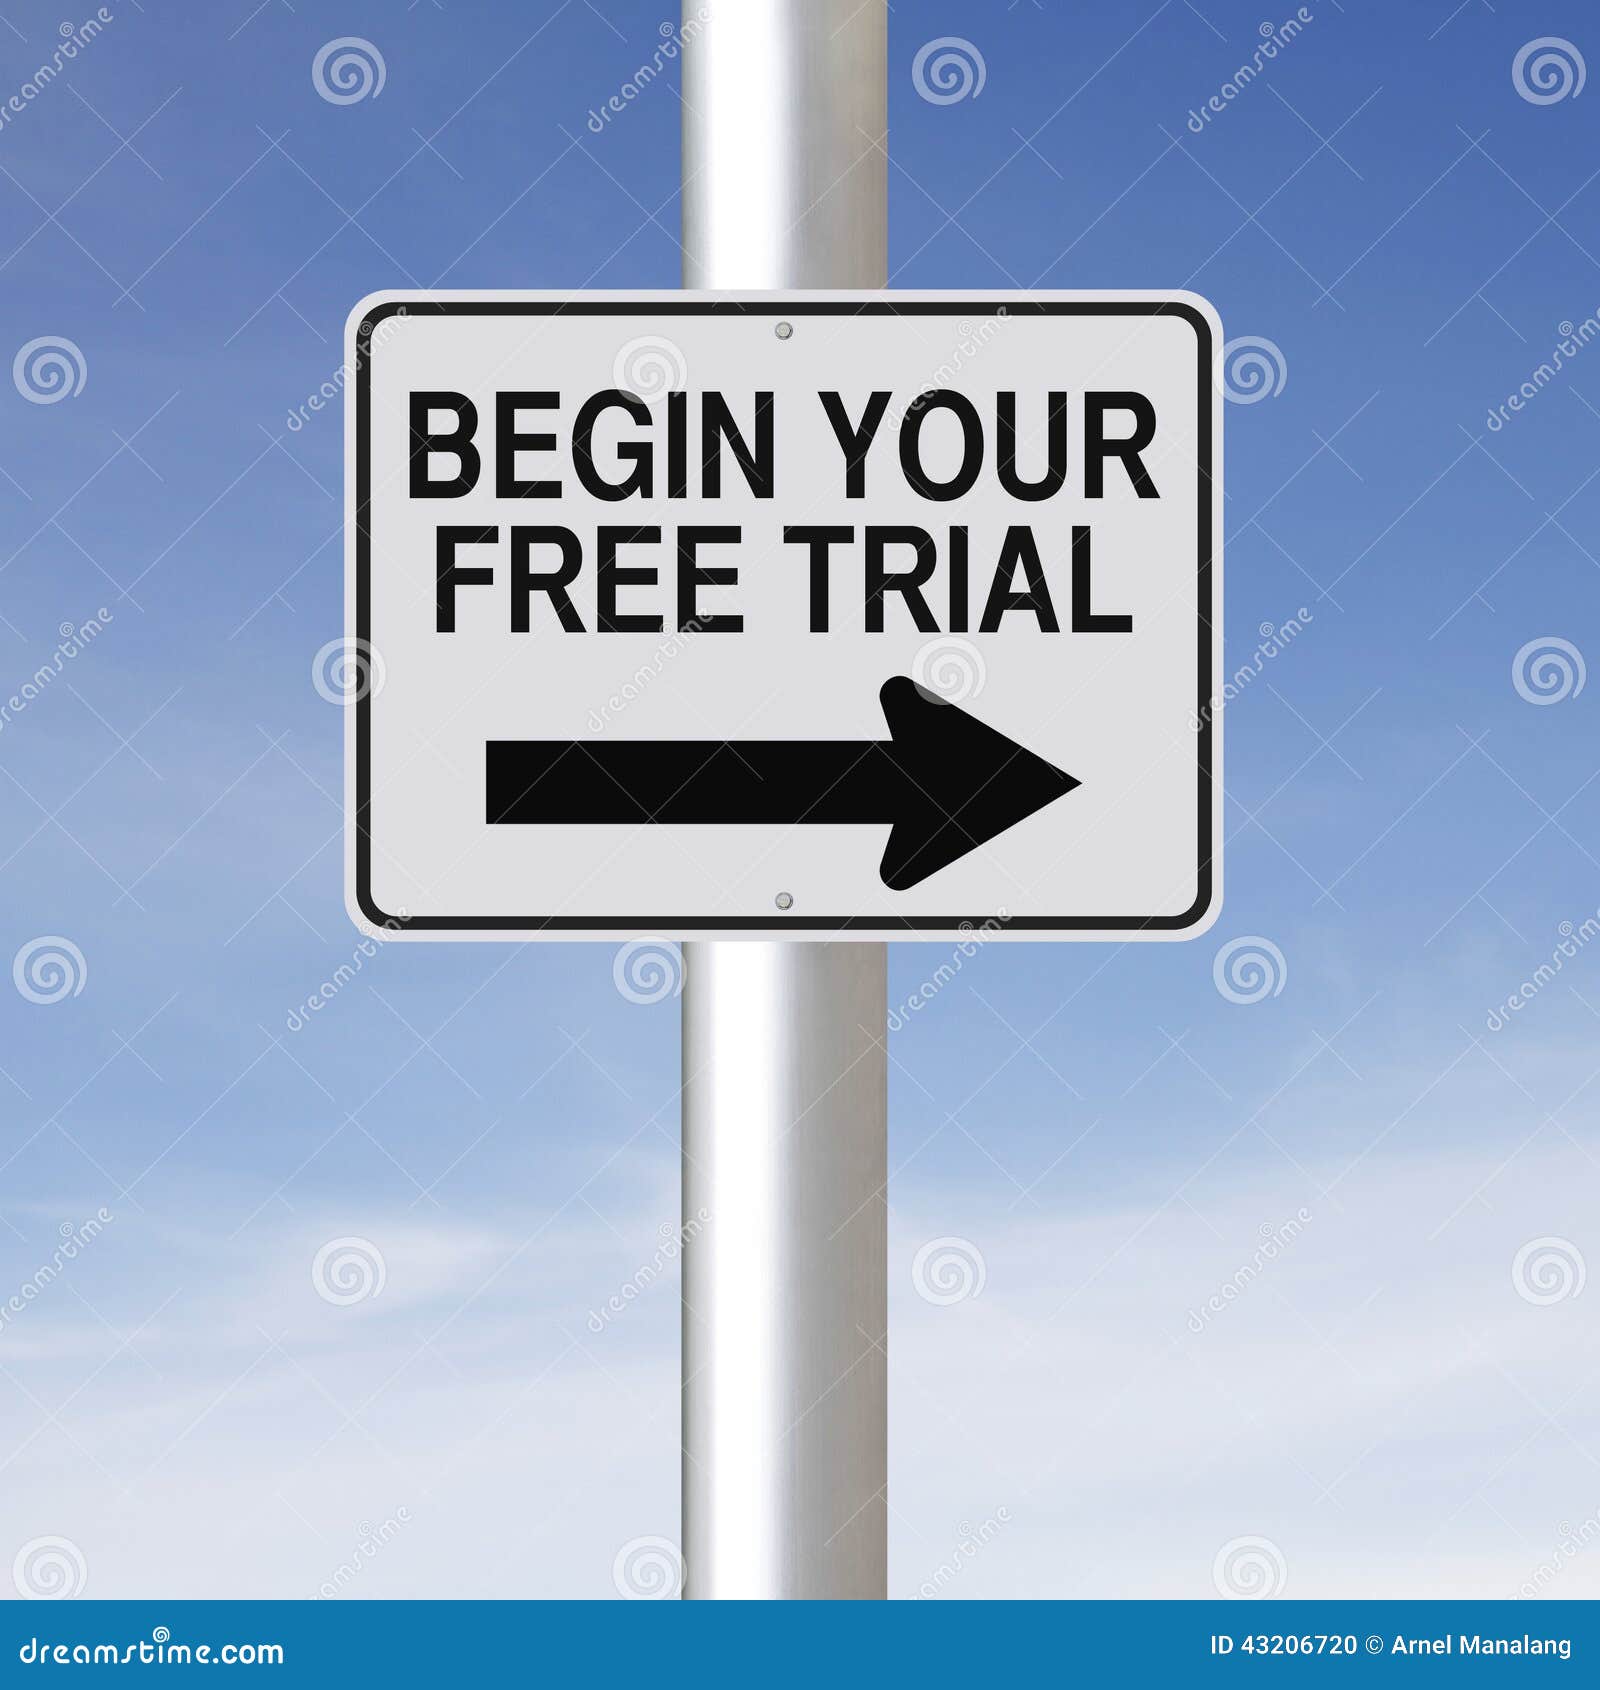 begin your free trial